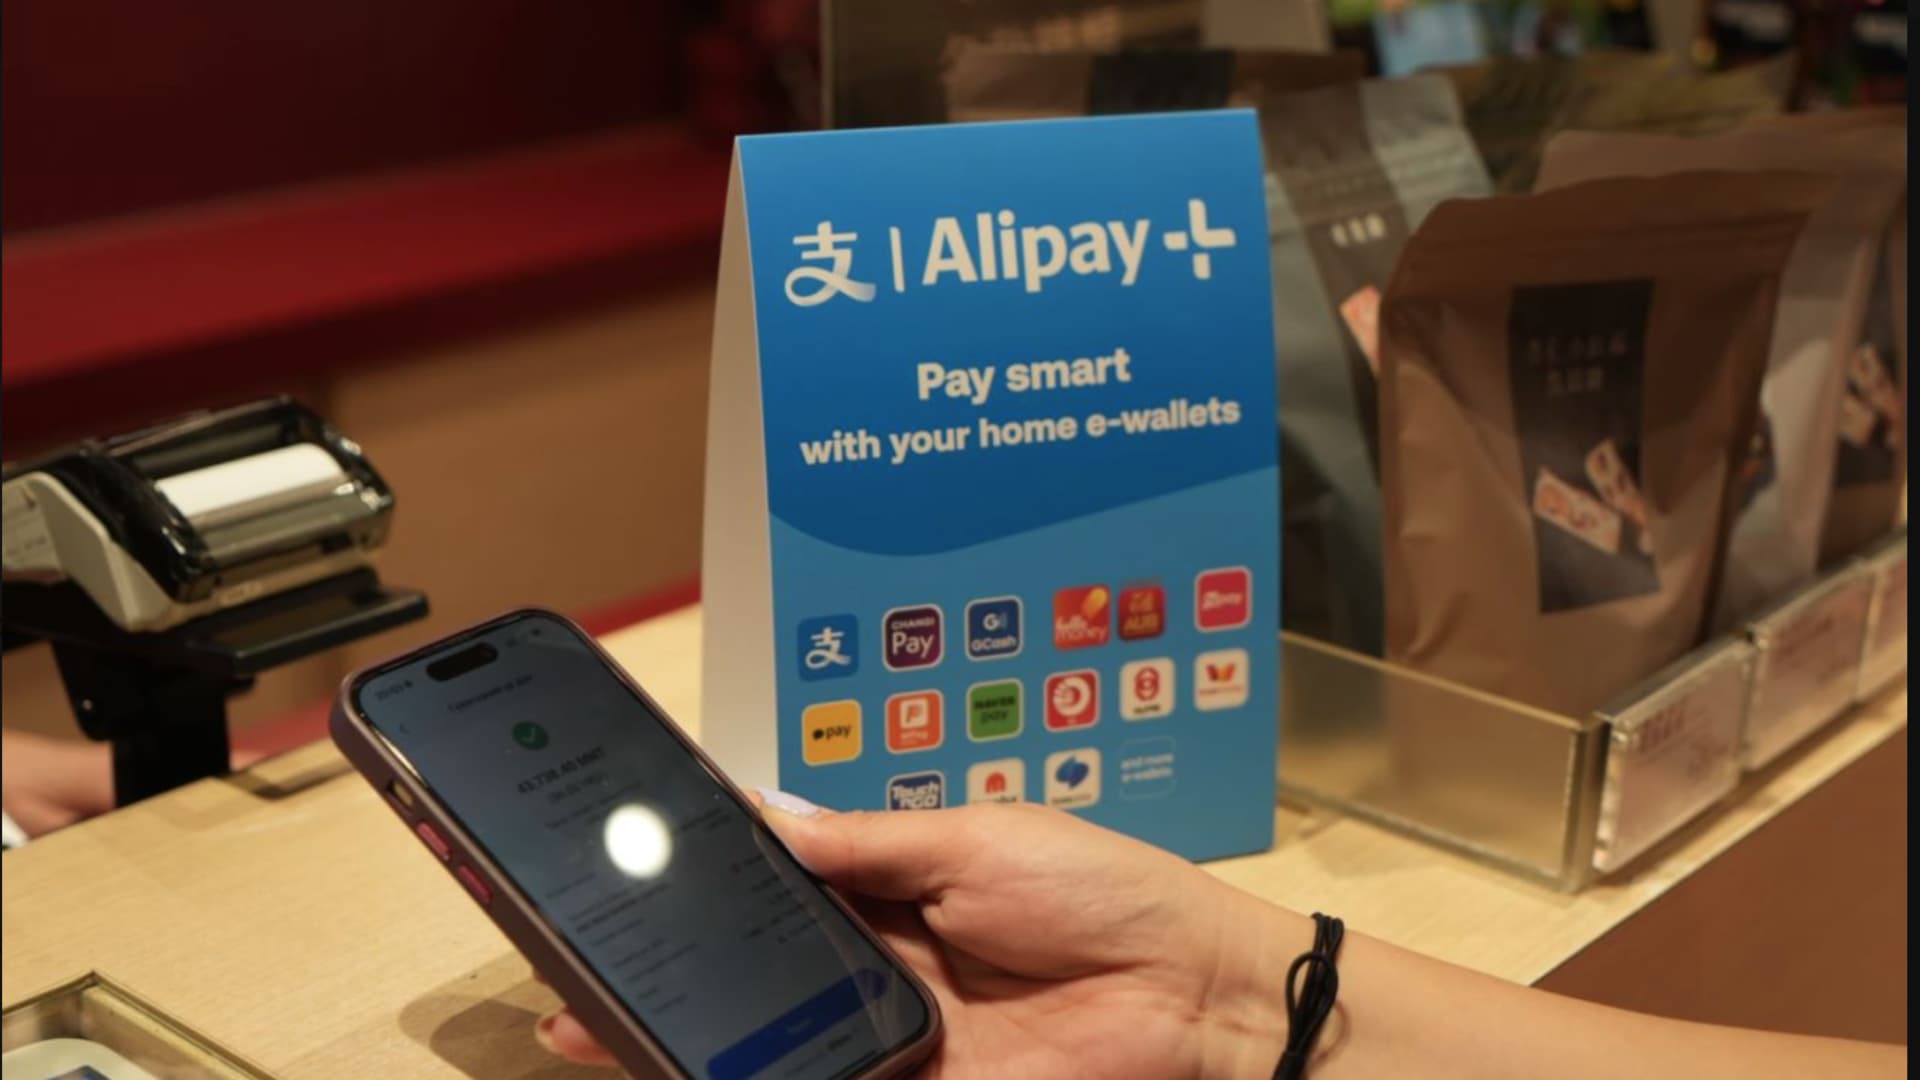 Chinese fintech Ant Group doubles down on global expansion with Alipay+ [Video]